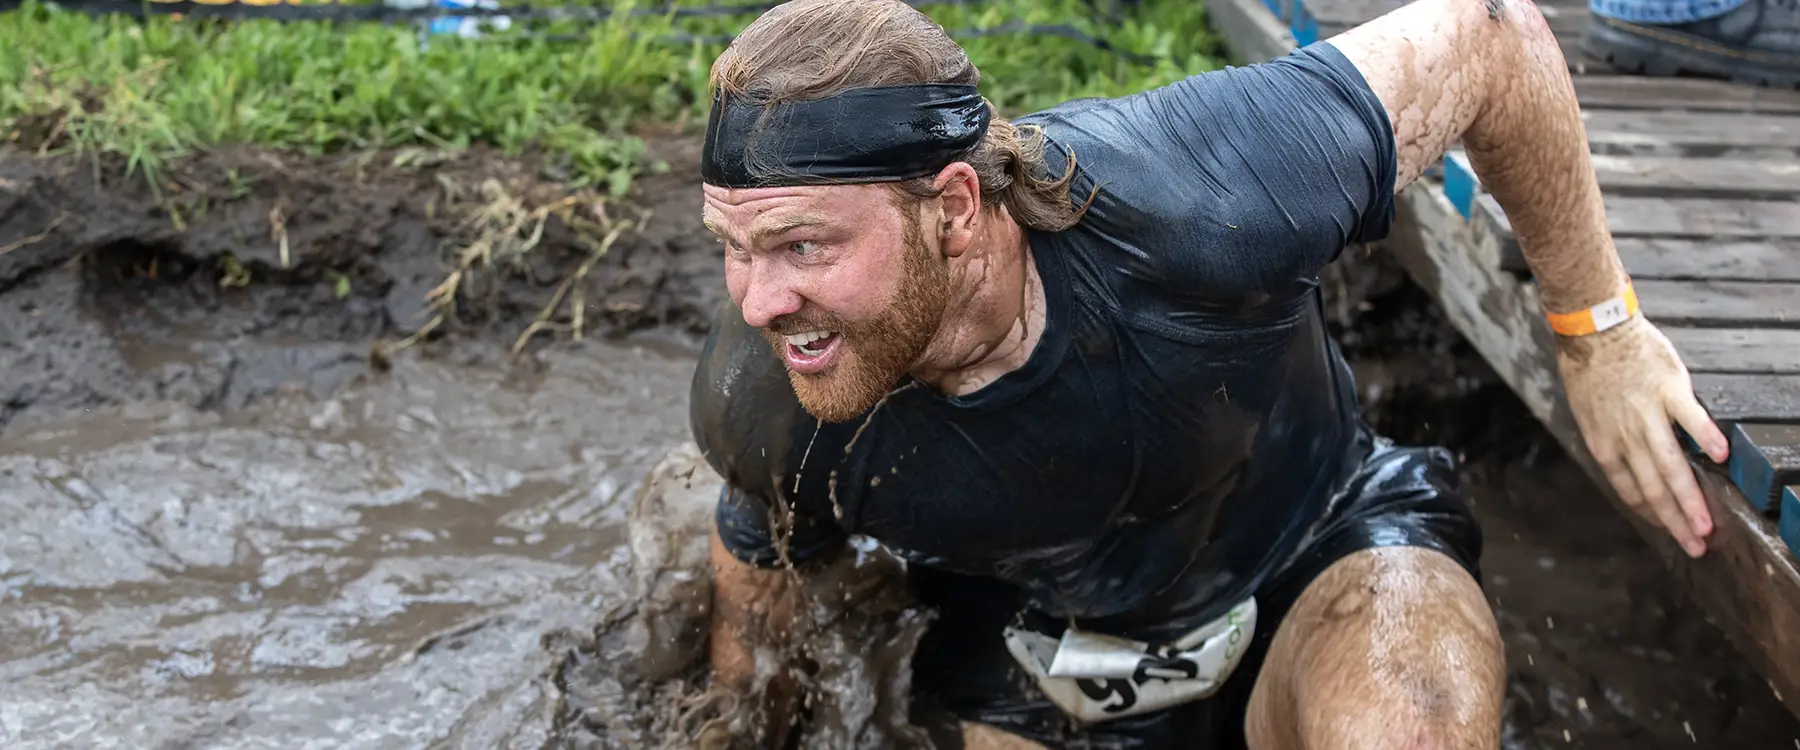 Athletic Man Running Through a Muddy Obstacle